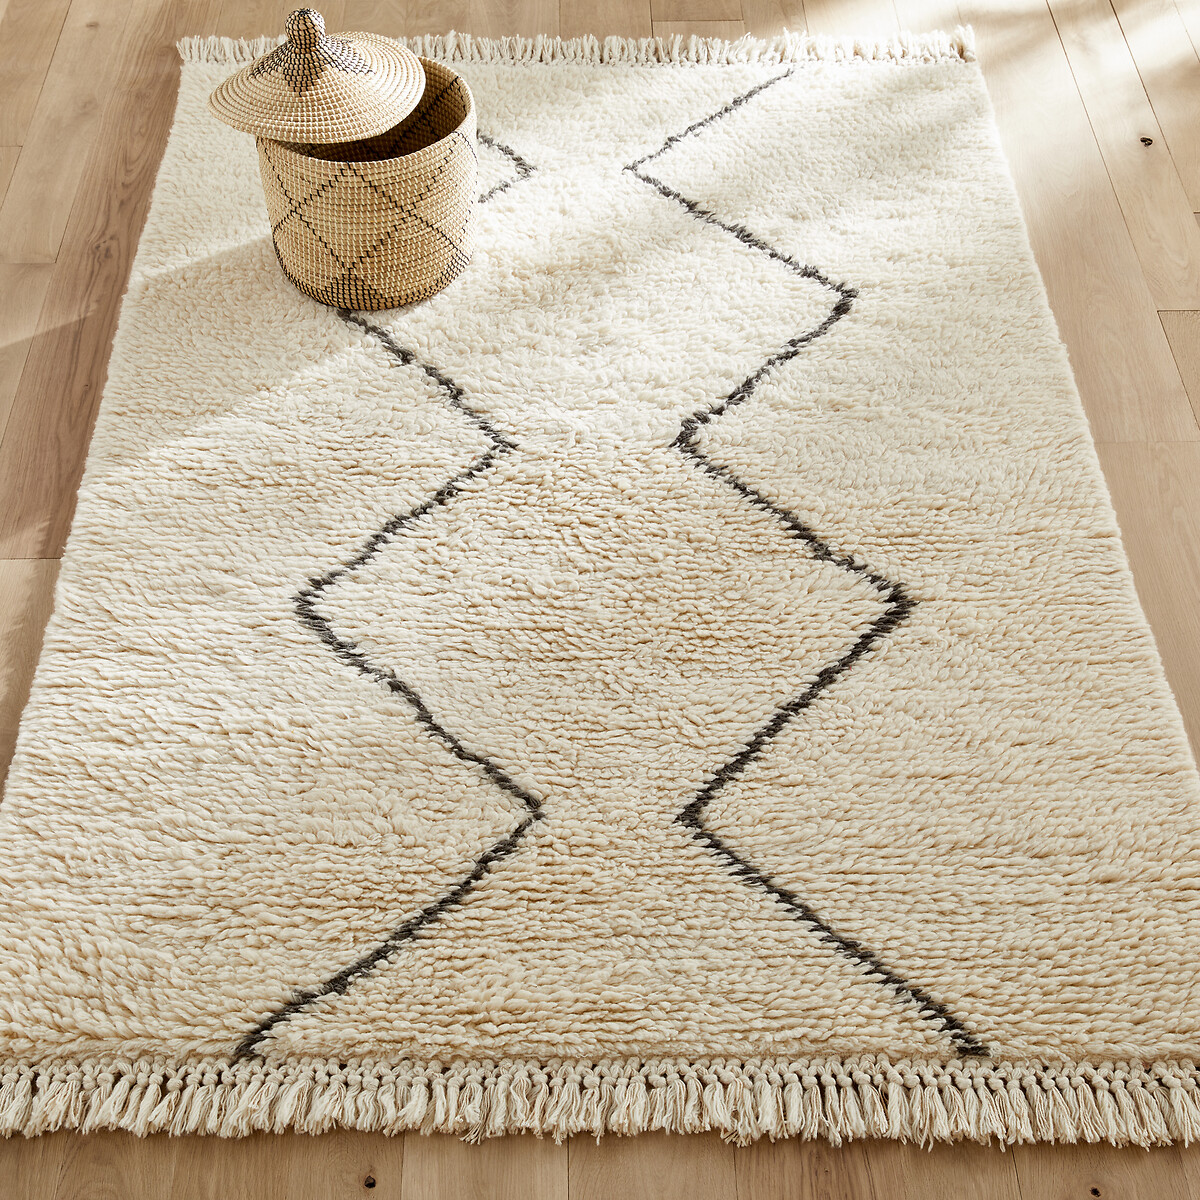 Buy Online Carpet Brush Available In Pakistan In 2021